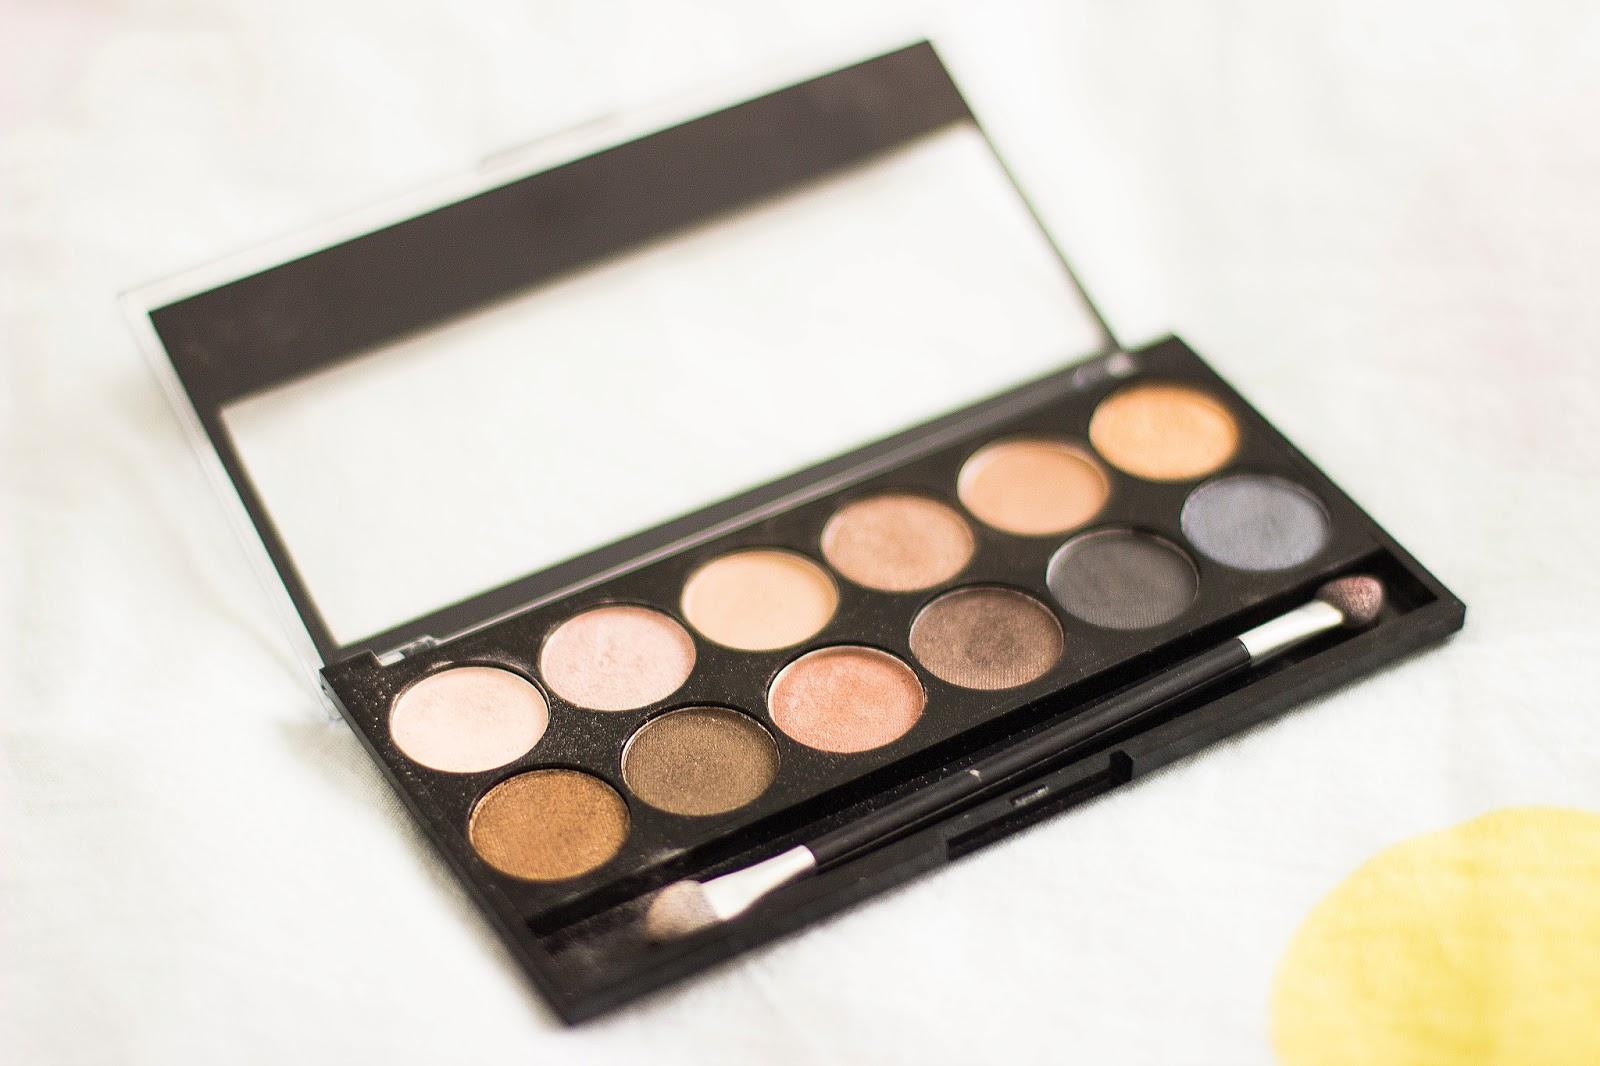 MAKEUP ACADEMY UNDRESSED PALETTE